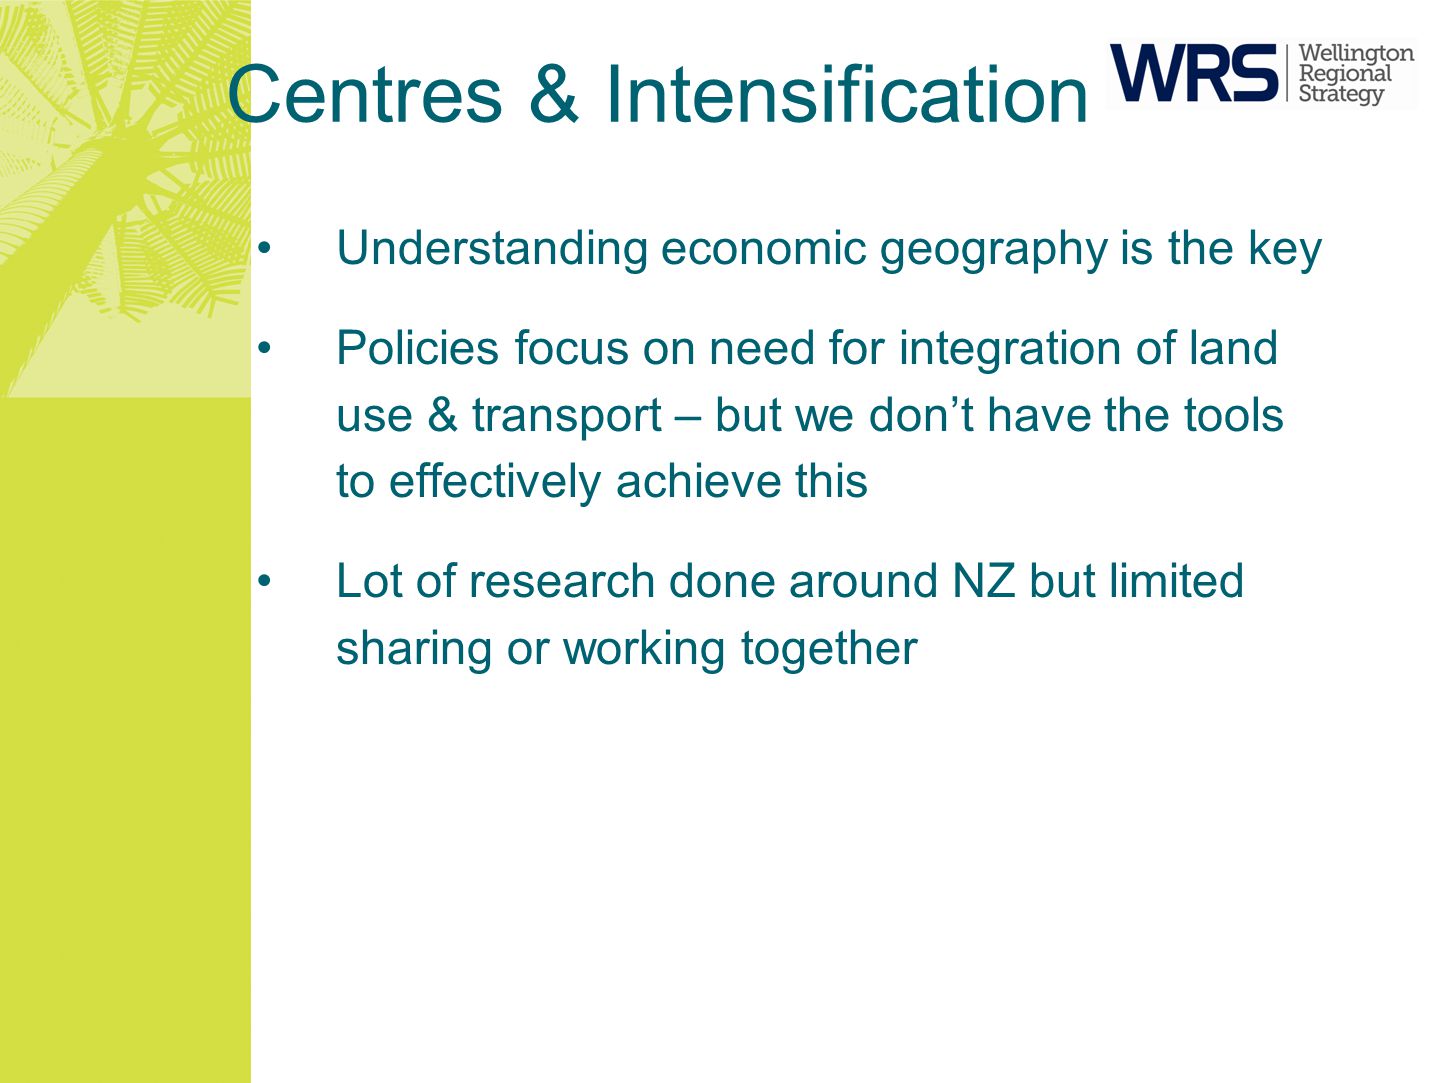 Centres & Intensification Understanding economic geography is the key Policies focus on need for integration of land use & transport – but we don’t have the tools to effectively achieve this Lot of research done around NZ but limited sharing or working together